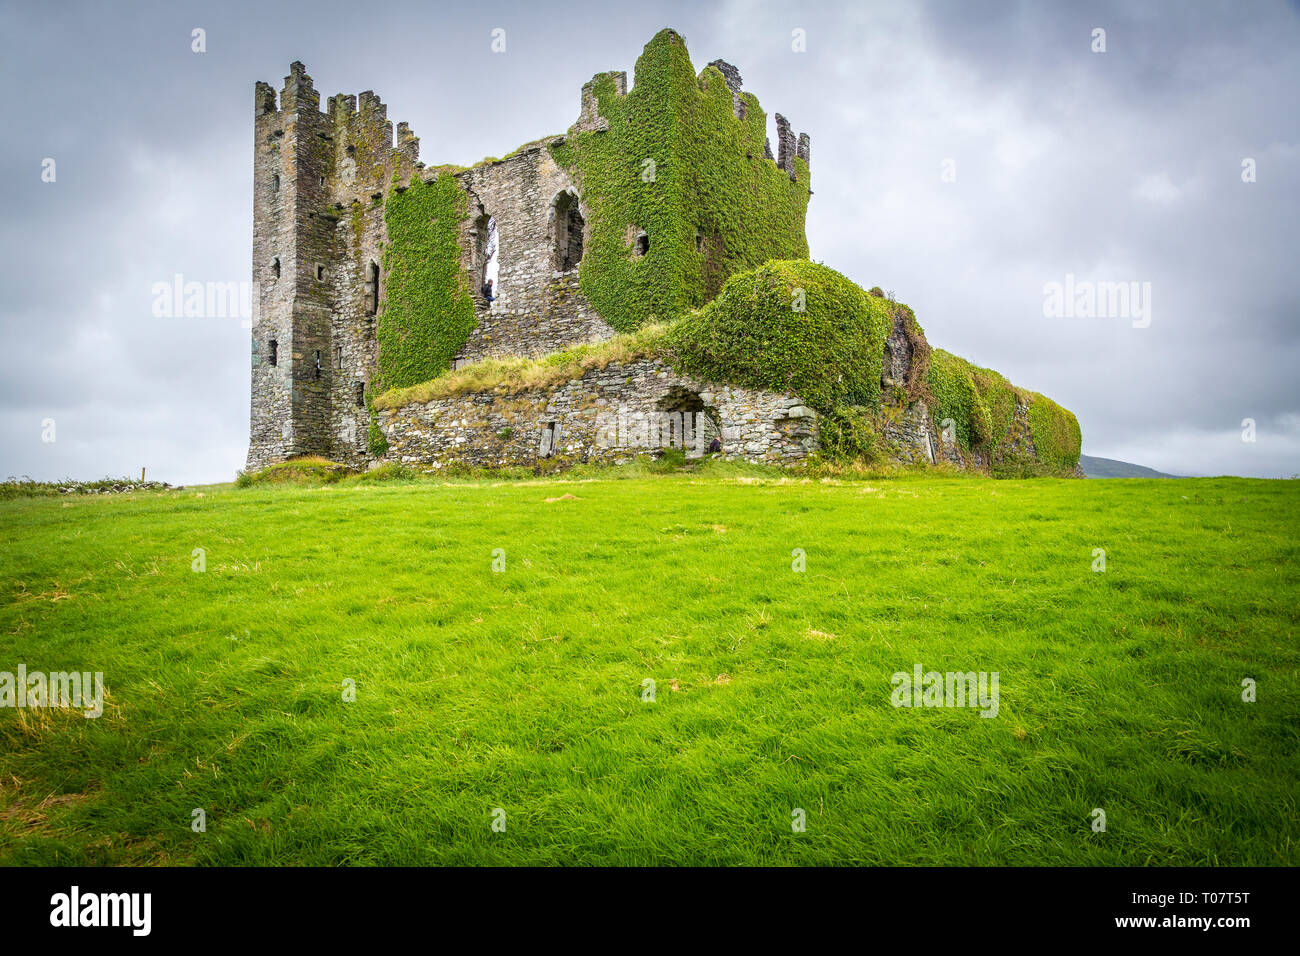 Ballycarbery Castle Wallpapers